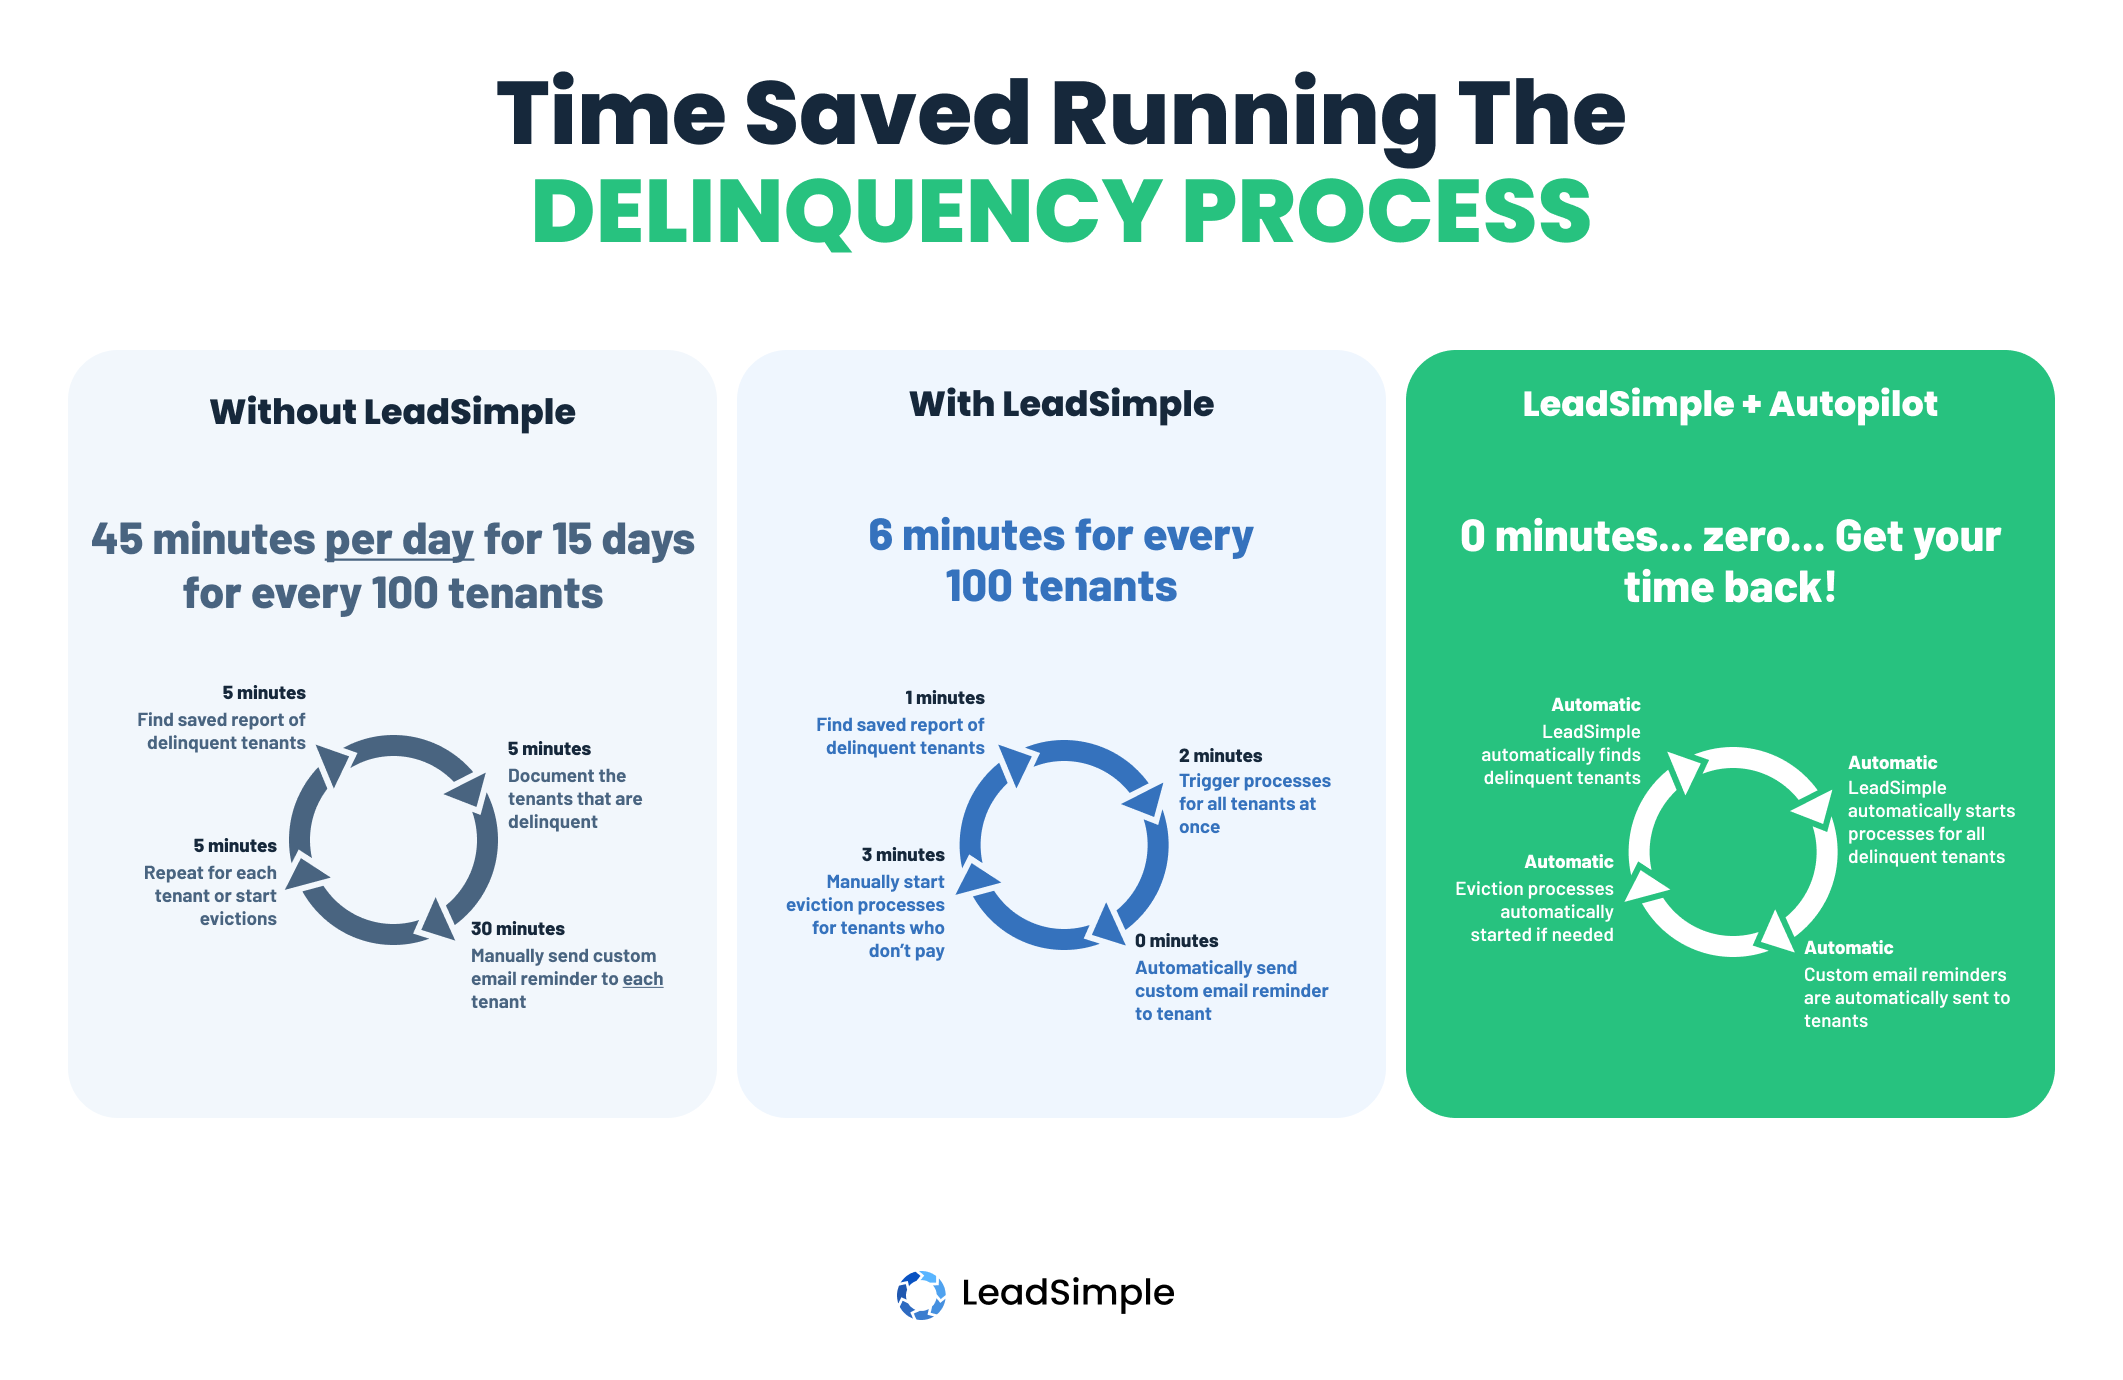 Time Saved Running Delinquency Process